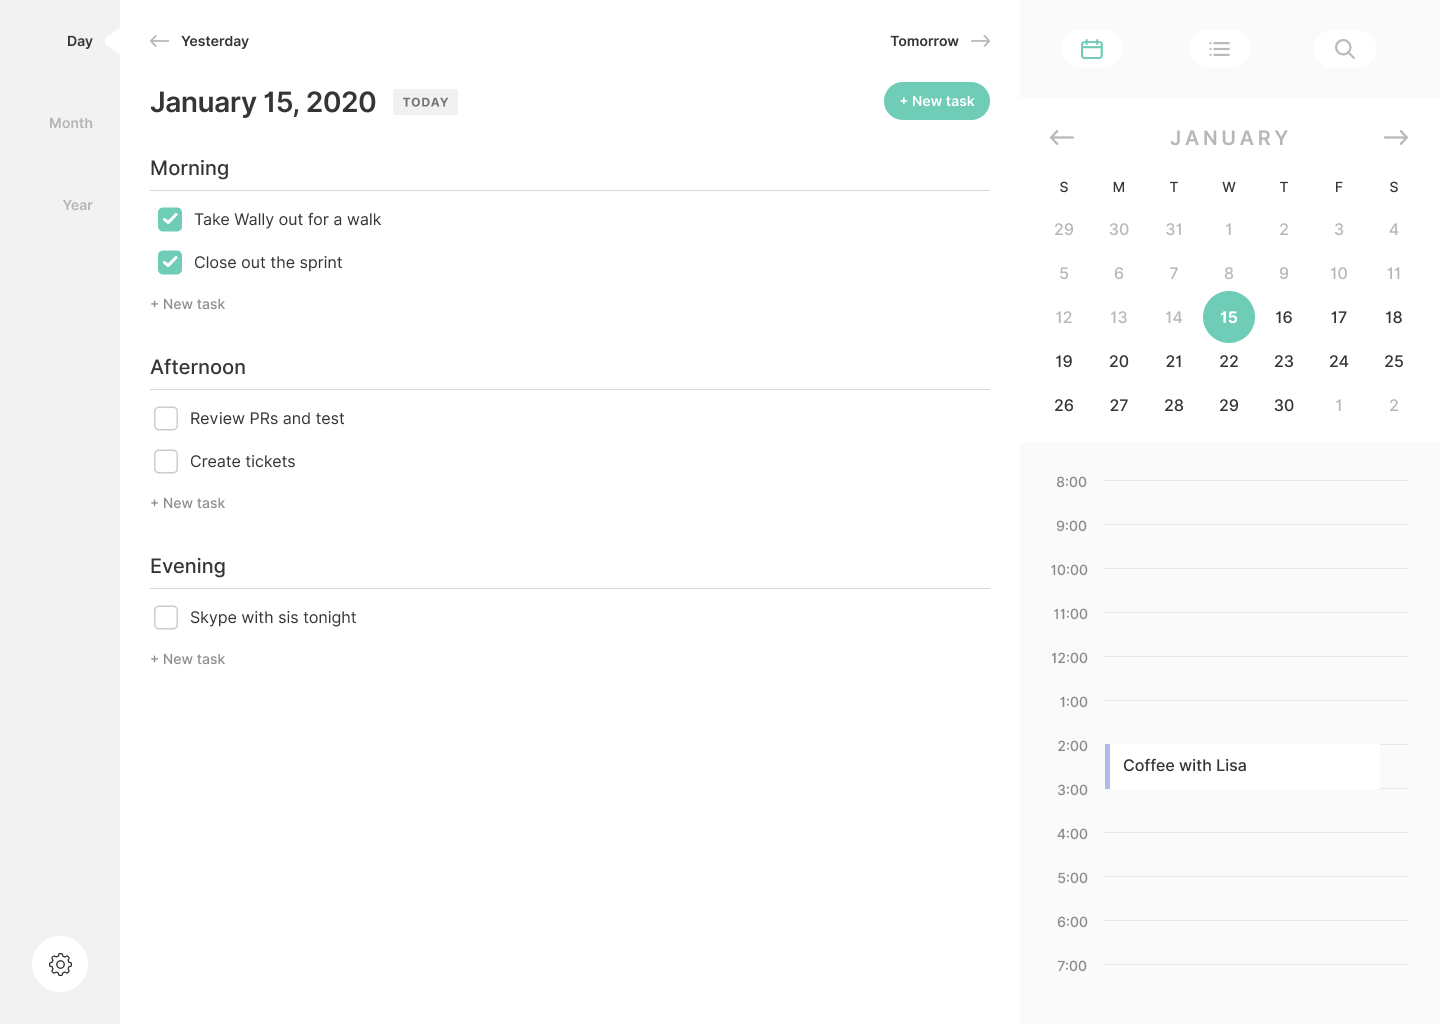 Screenshot of the day view calendar in the planner app